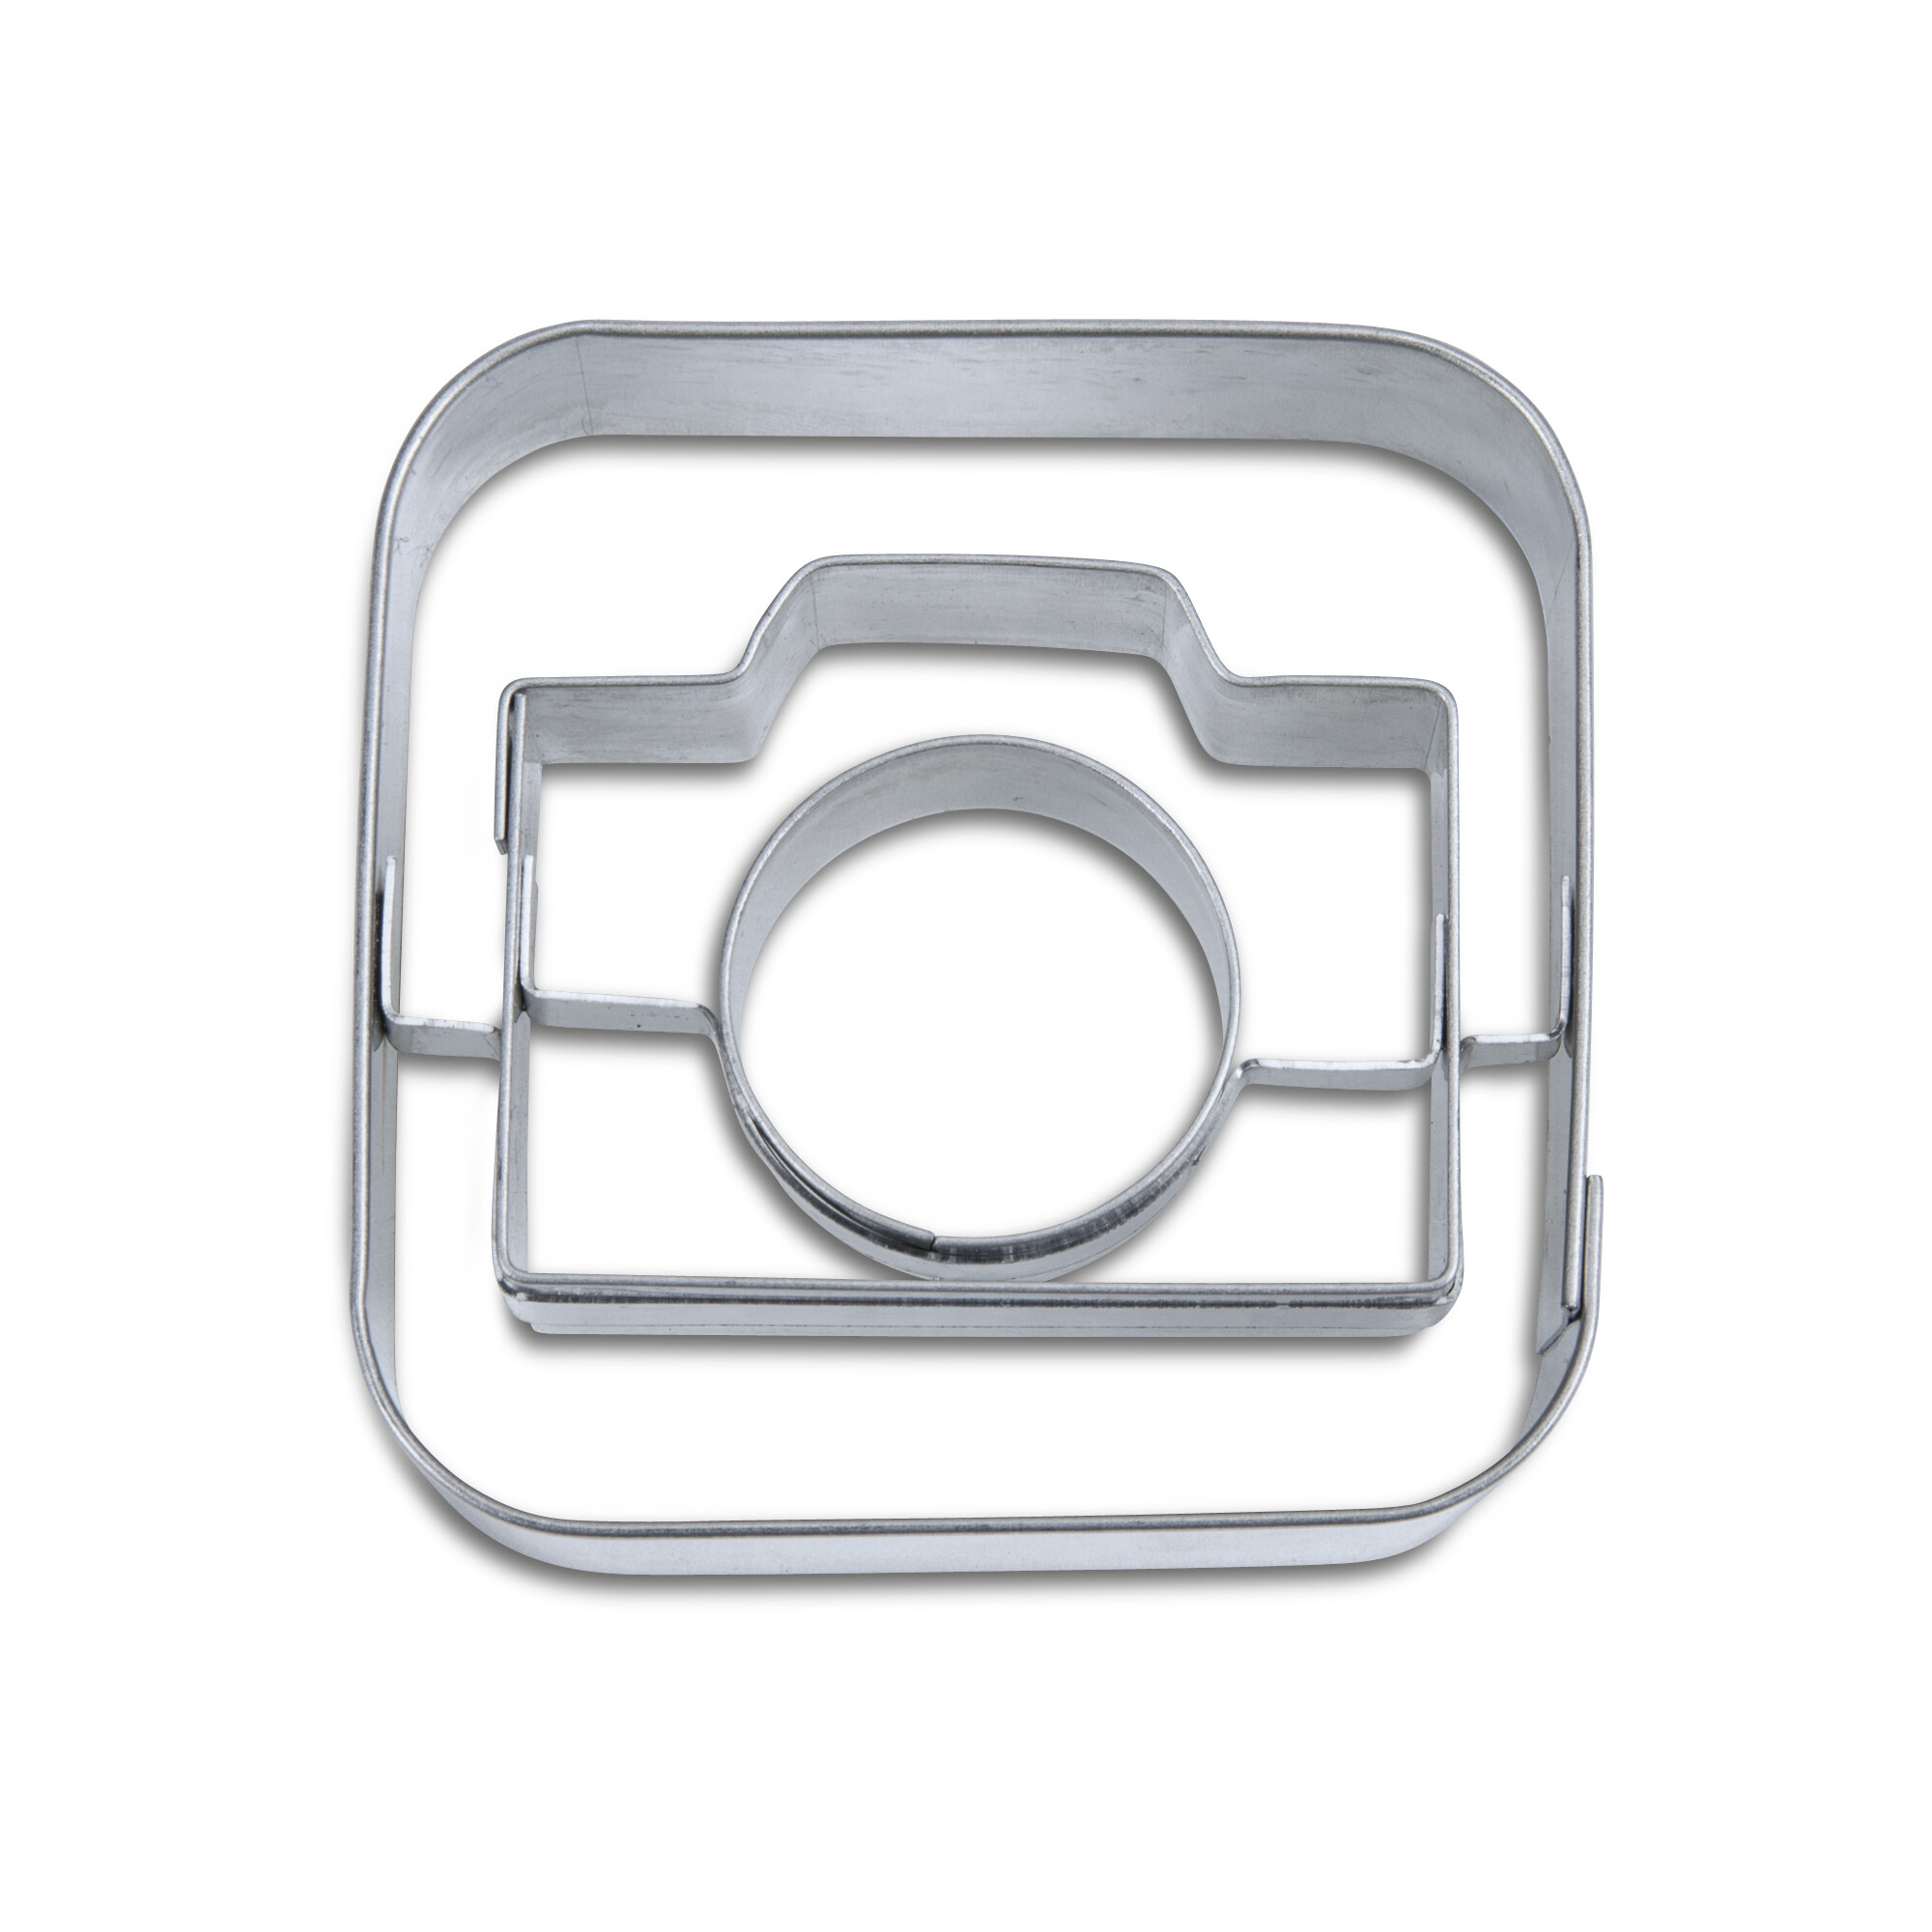 Cookie cutter with stamp – App-Cutter camera